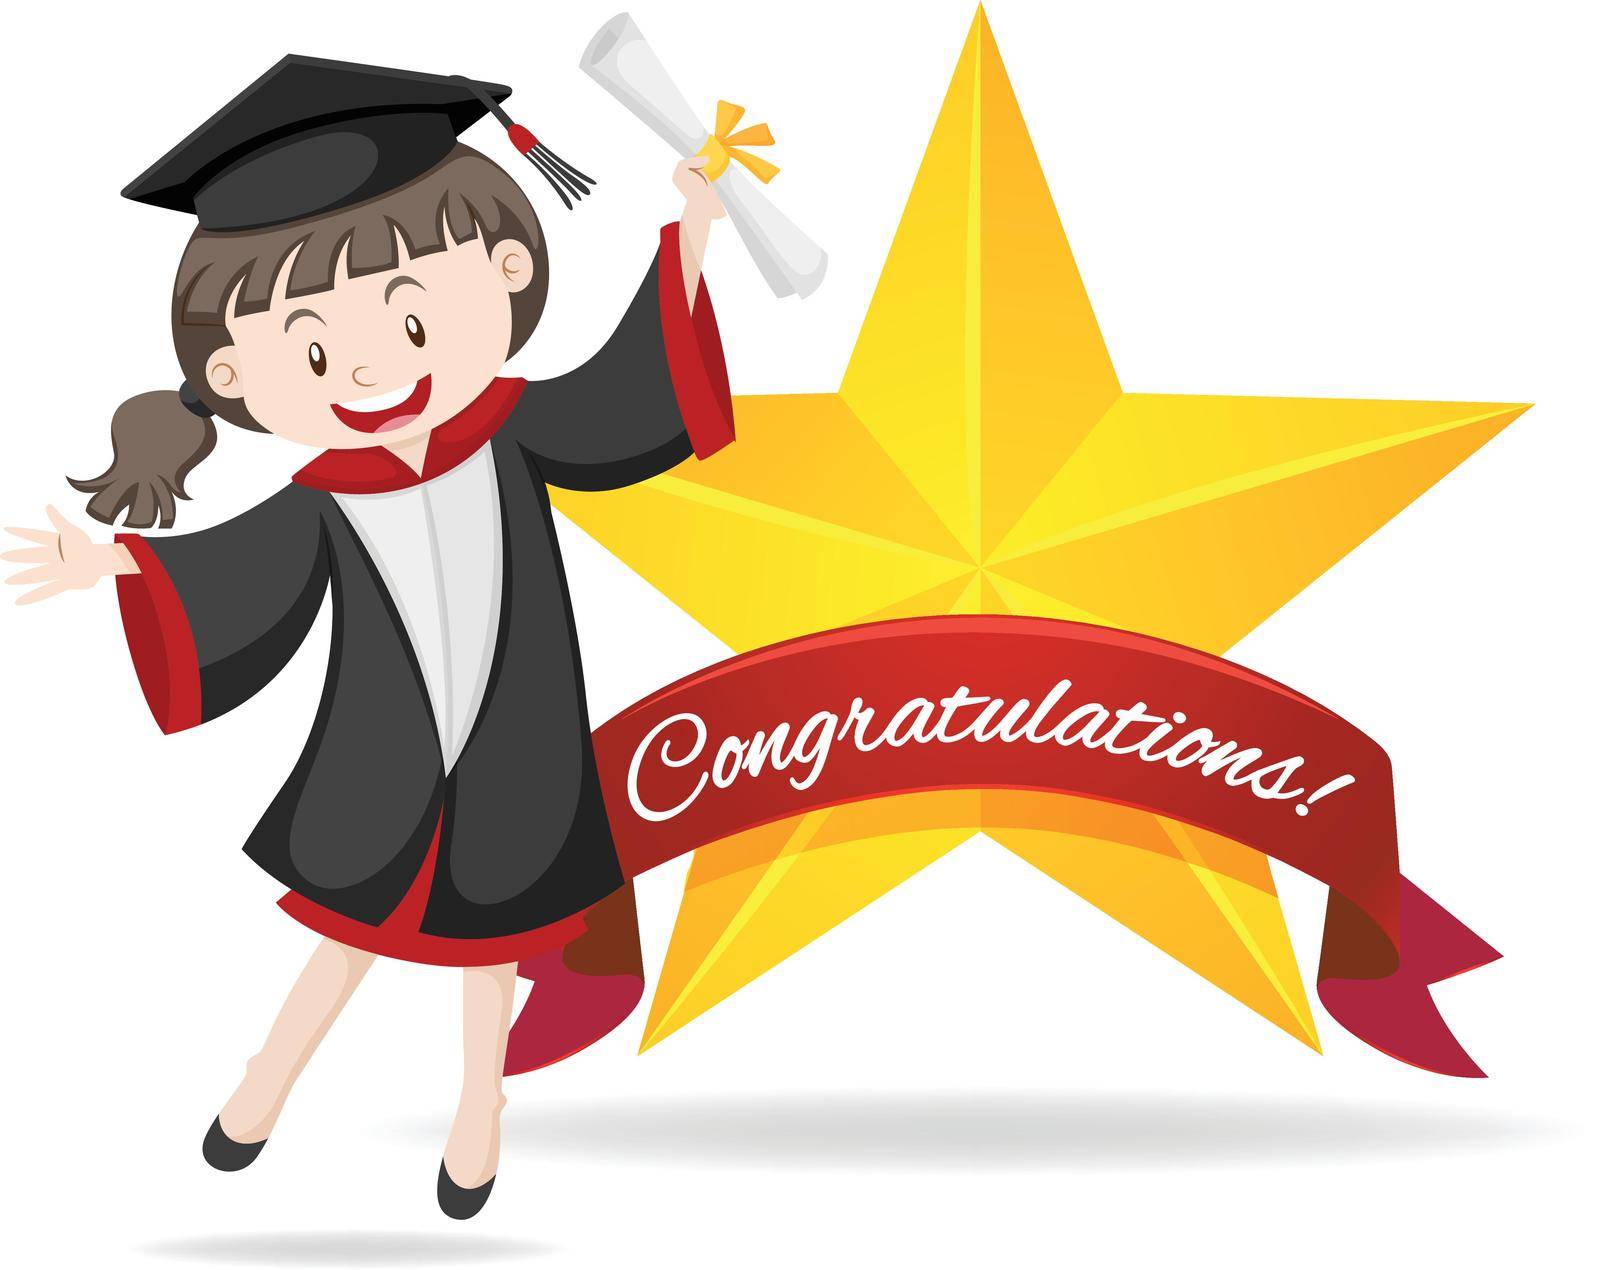 Congratulation sign with girl holding degree illustration